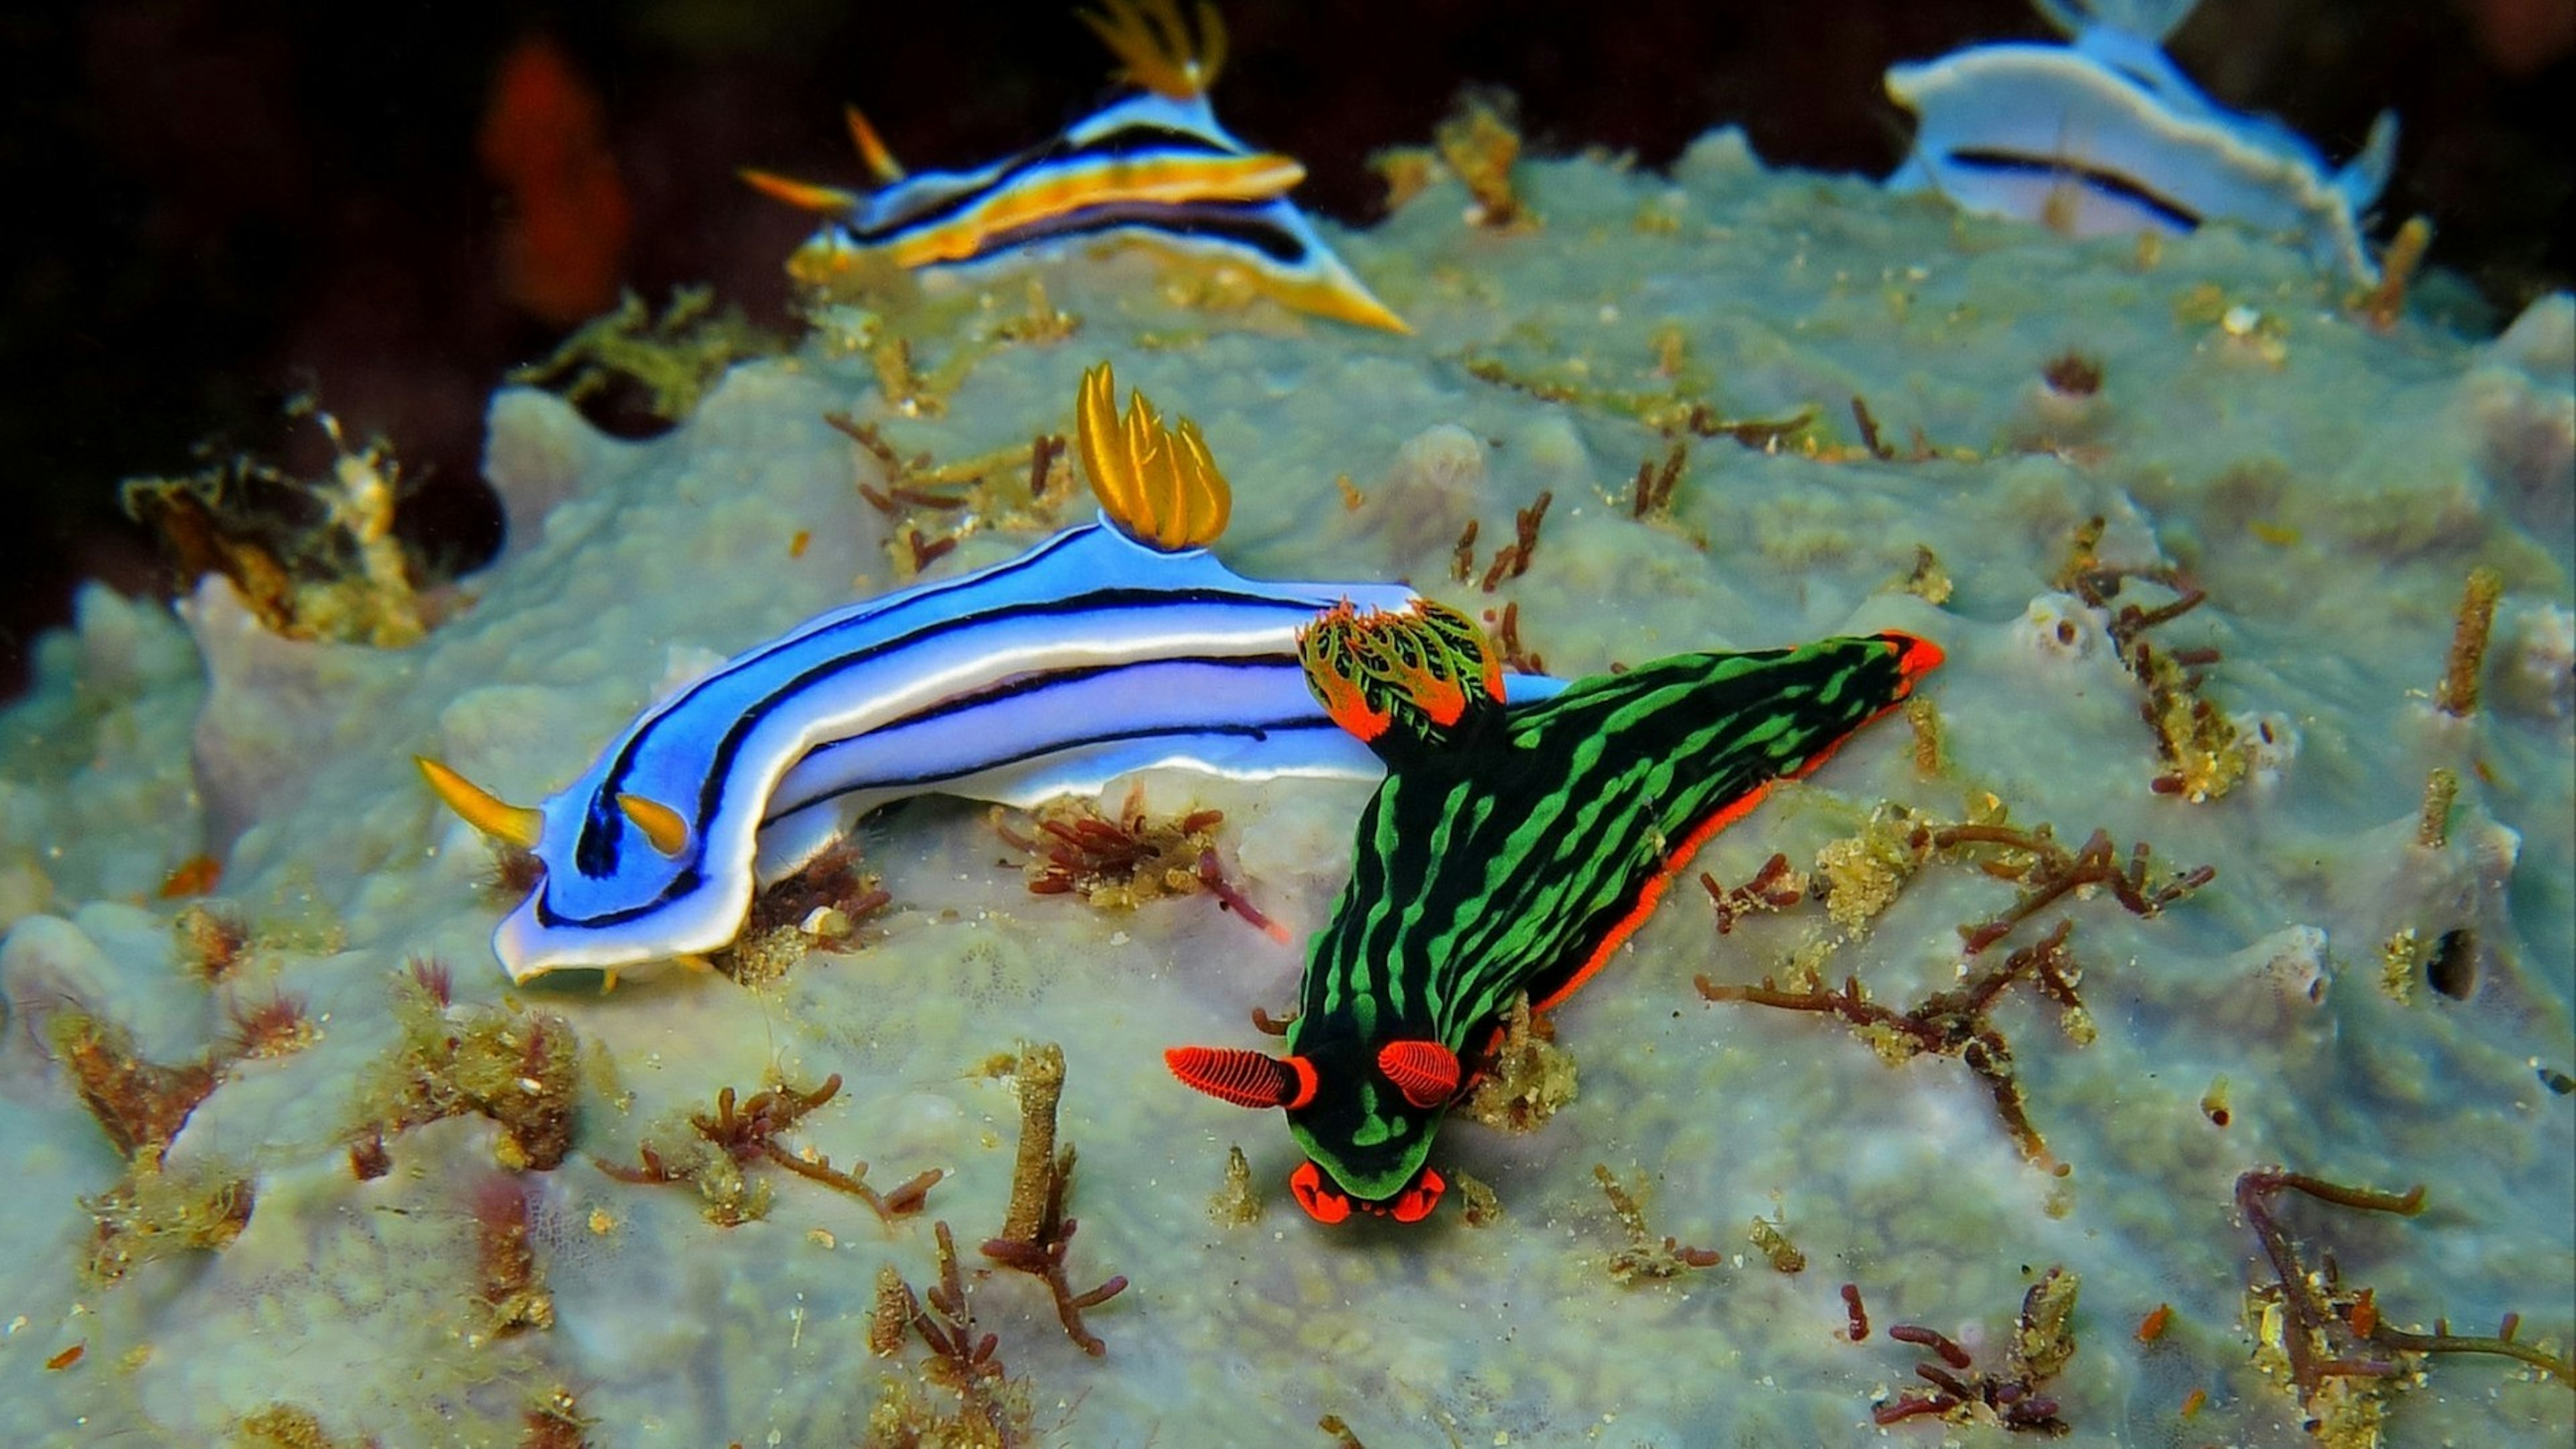 Group of the colorful underwater nudibranch on the coral reef